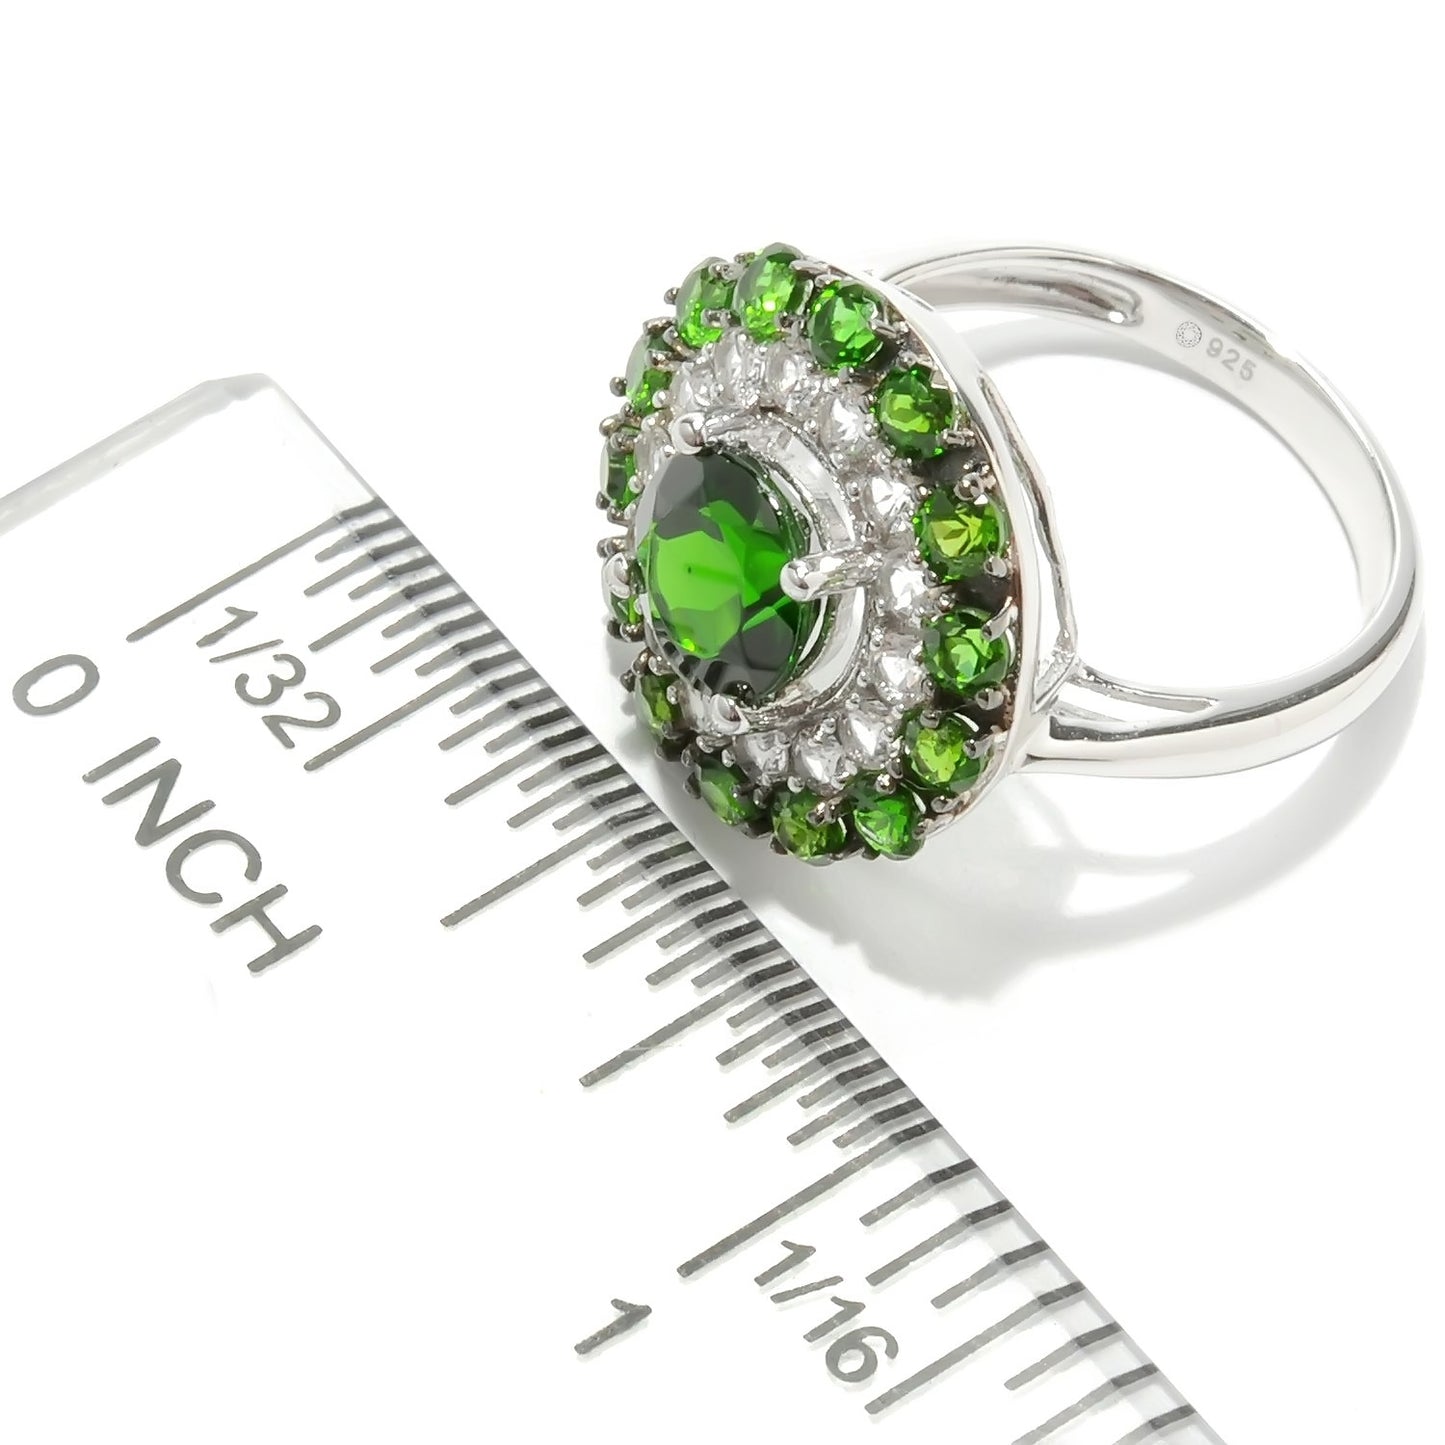 Pinctore Sterling Silver 3.18ctw Chrome Diopside Cocktail Ring, Size 7